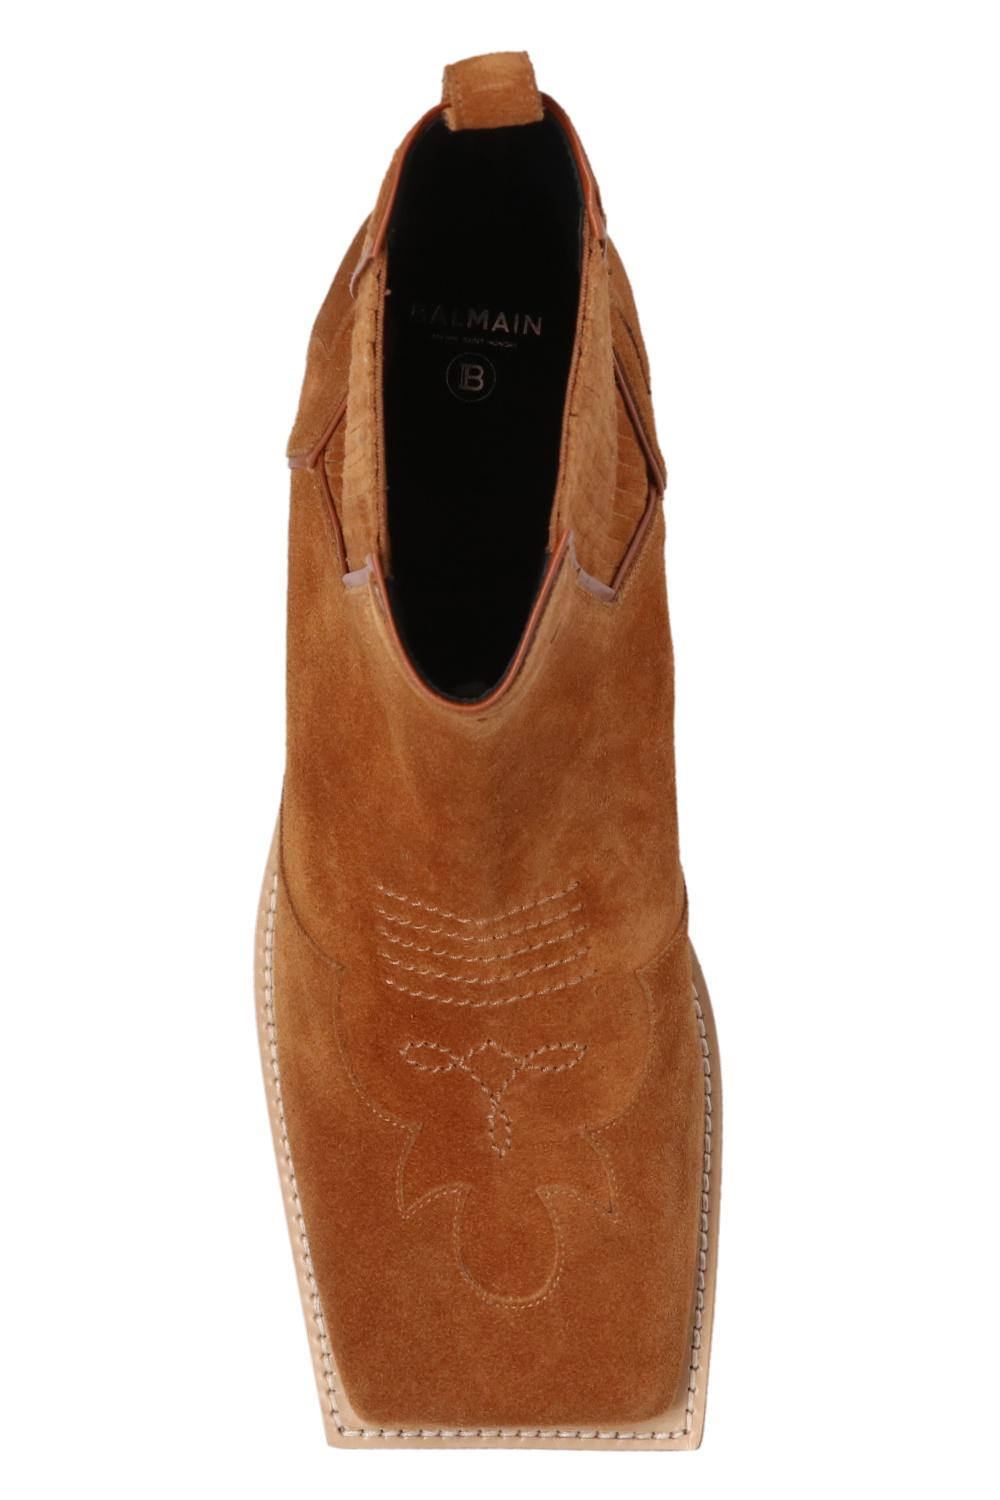 Balmain Suede heeled ankle boots